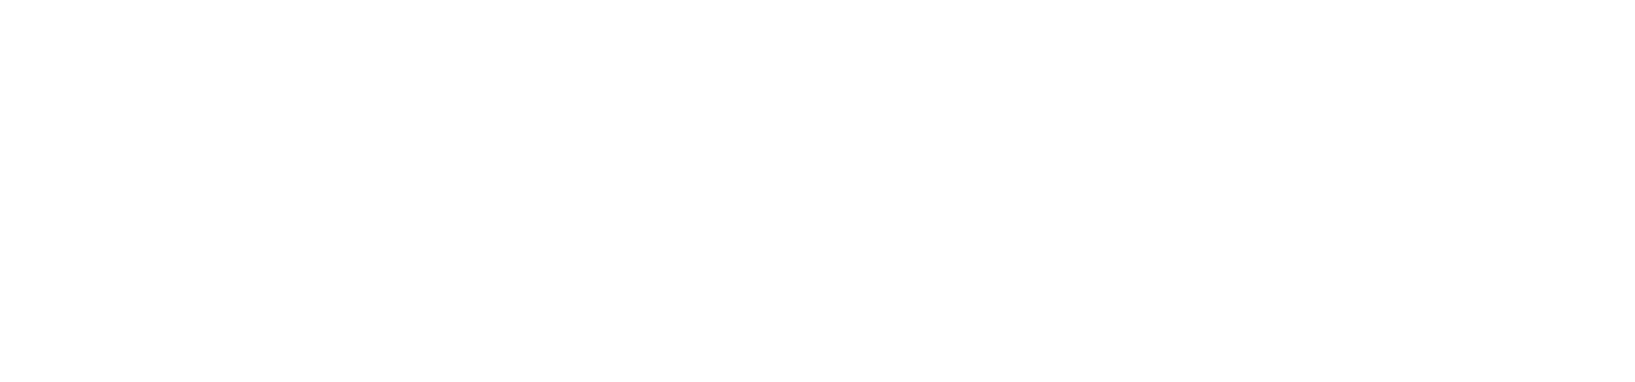 trust wallet white.png